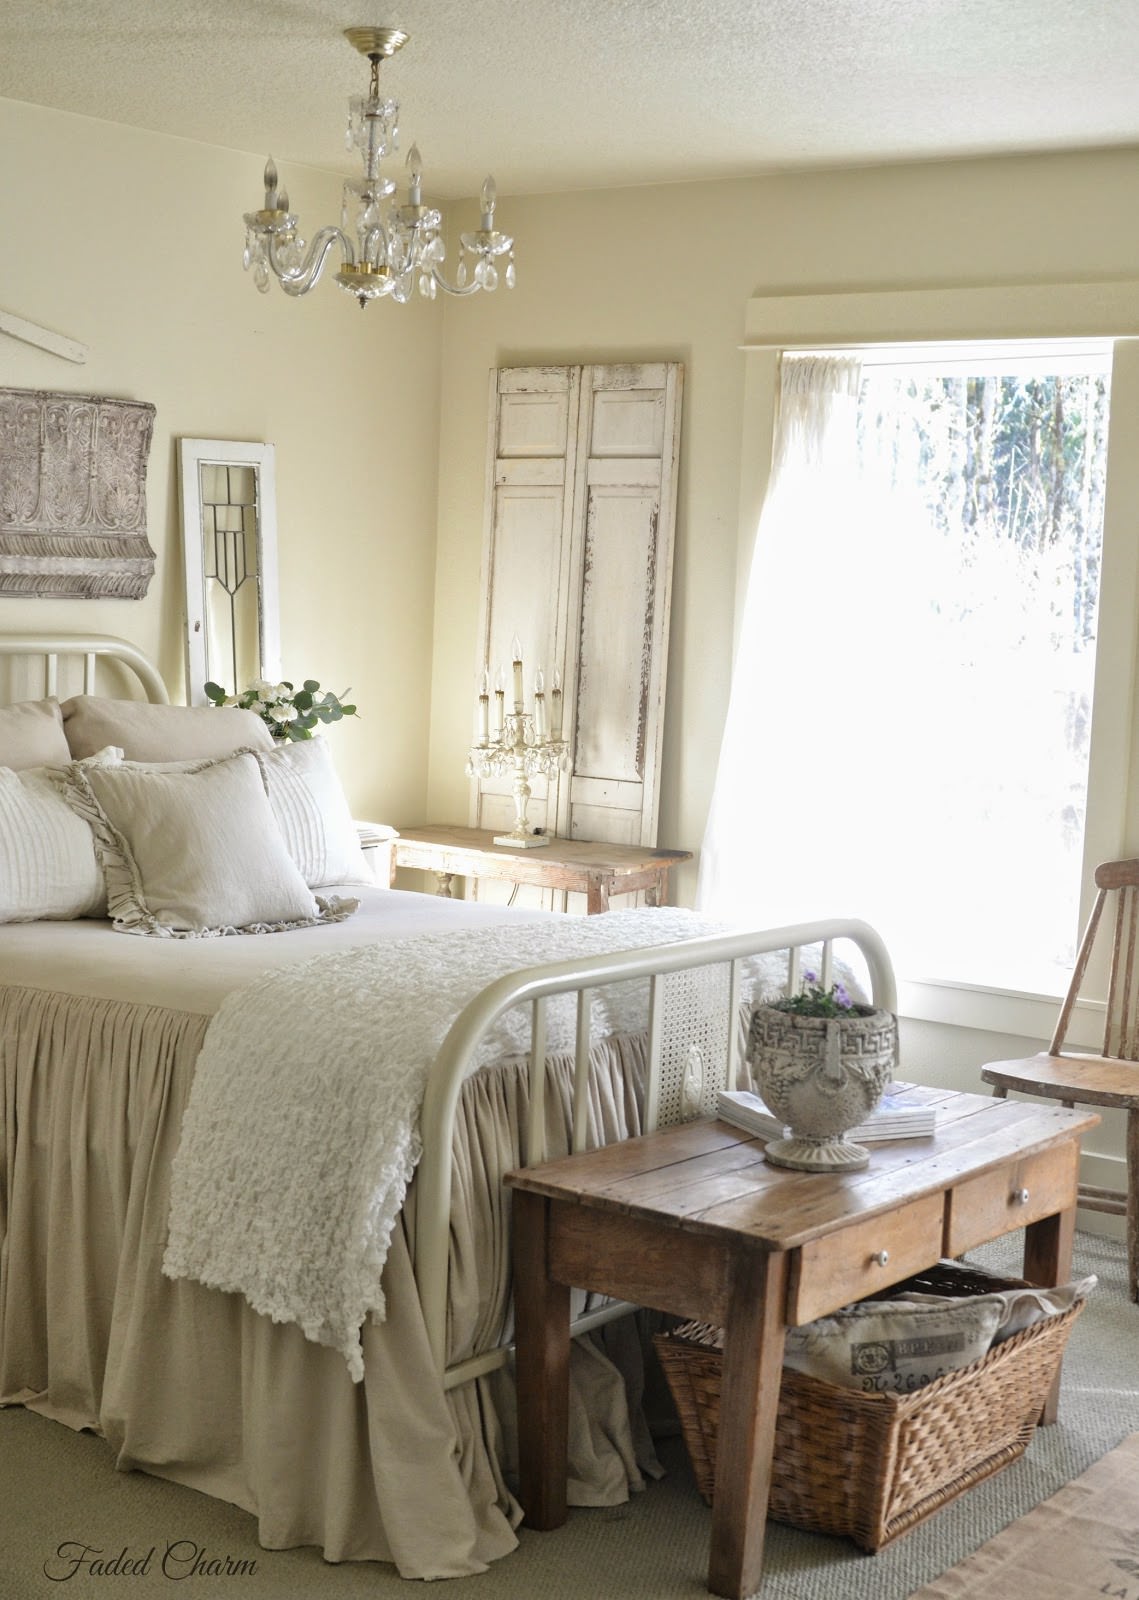 Country Style Bedroom Design - 30 Best French Country Bedroom Decor And ...